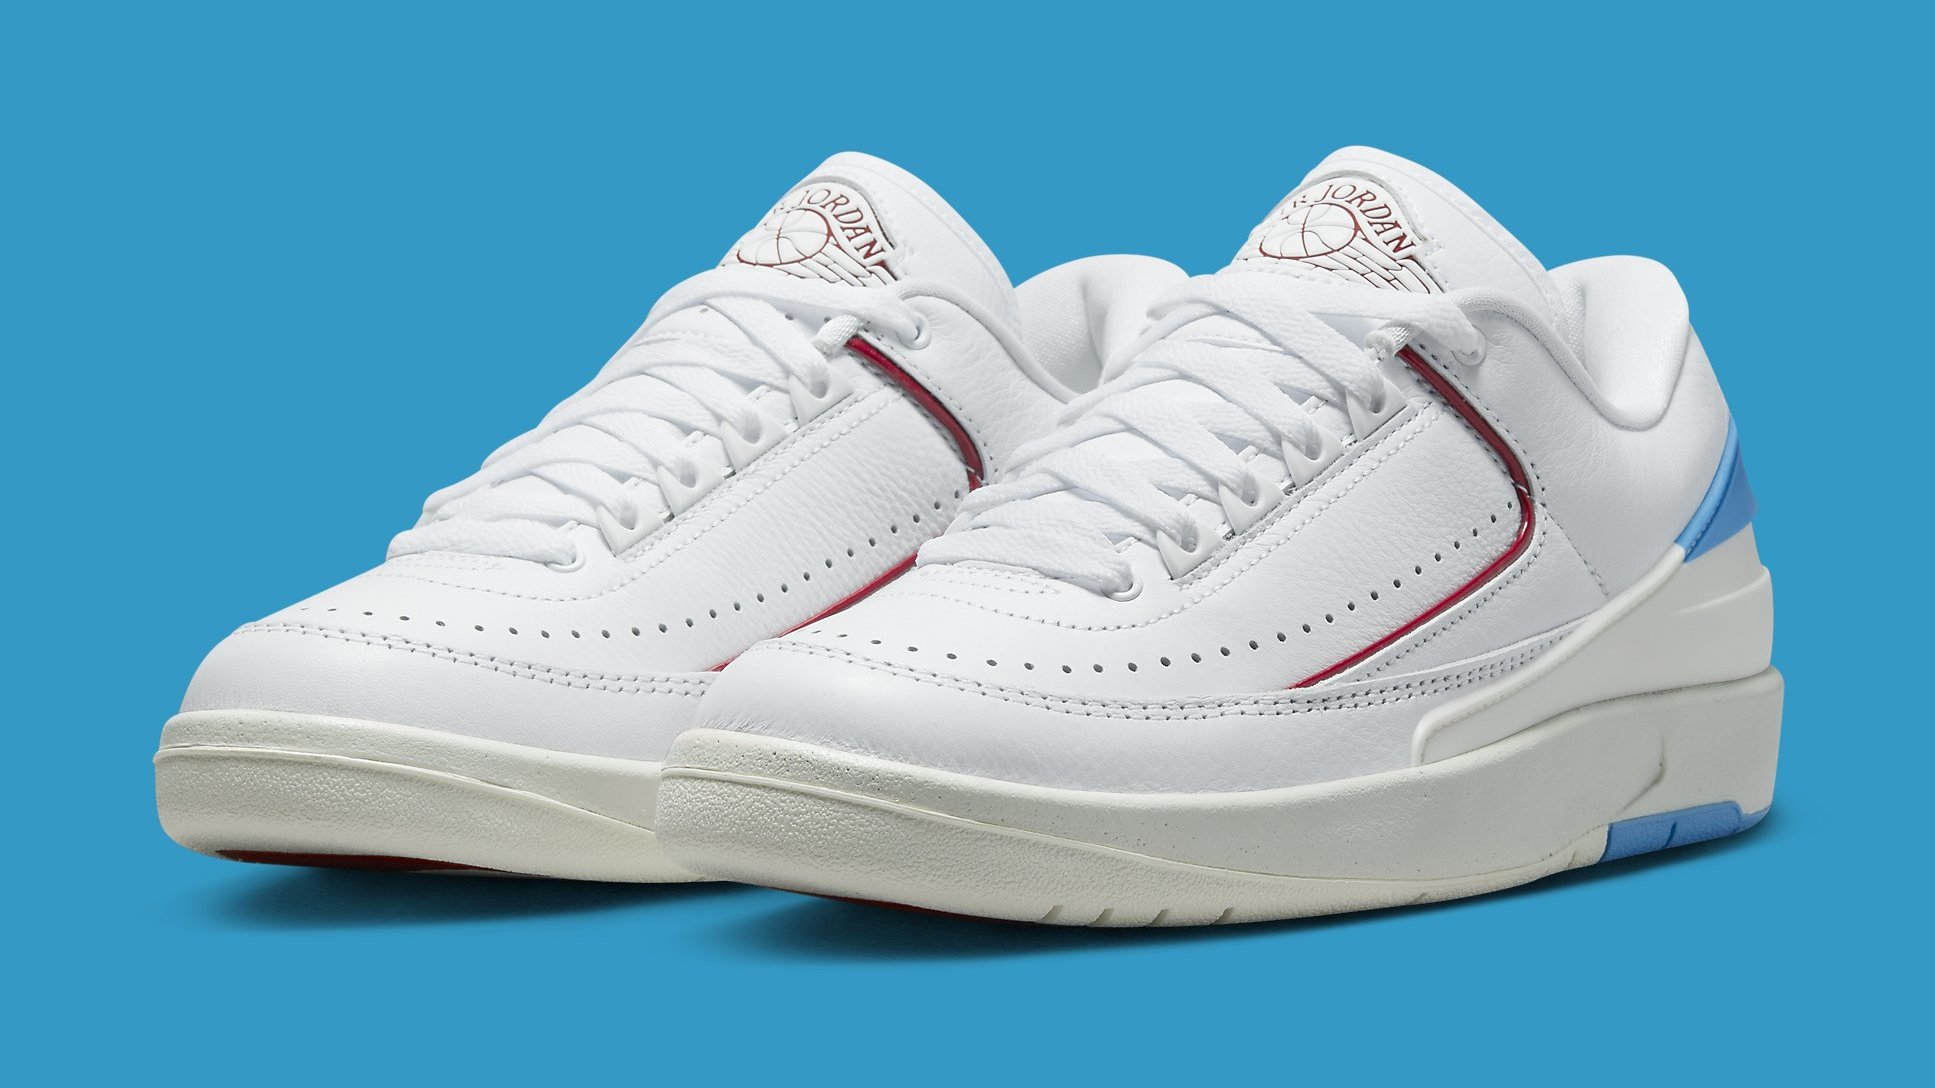 UNC to Chicago' Air Jordan 2 Low Drops in March | Complex